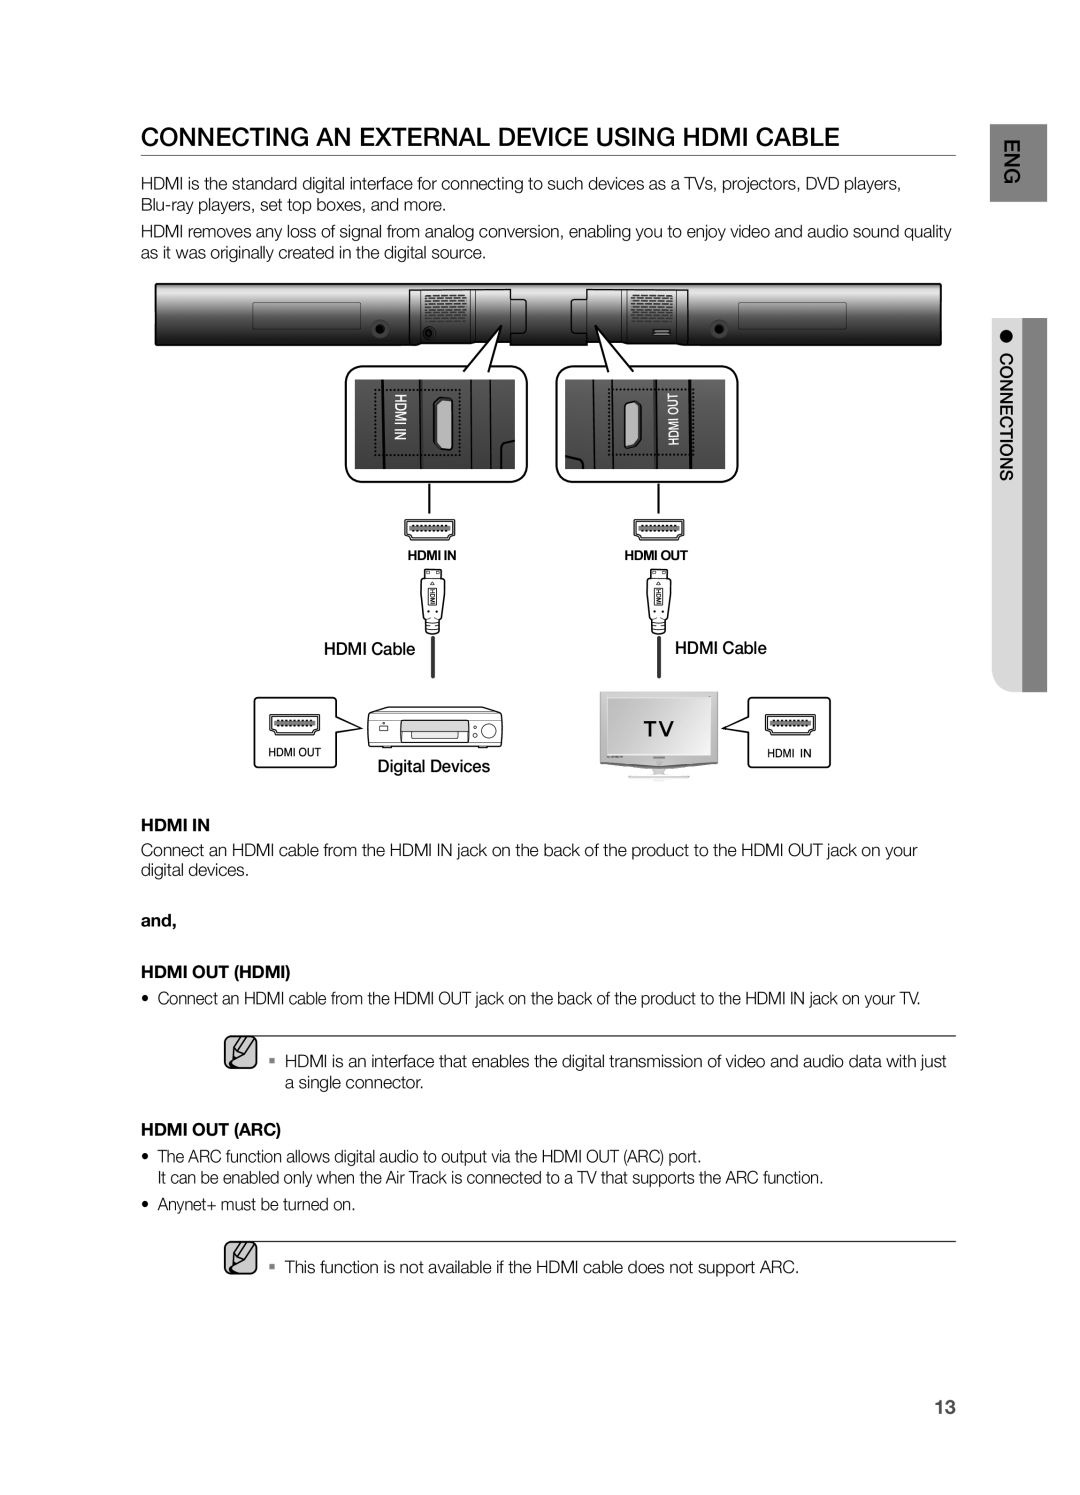 Samsung HW-FM55C user manual Connecting an external device using HDMI cable, Hdmi In, and HDMI OUT HDMI, Hdmi Out Arc 